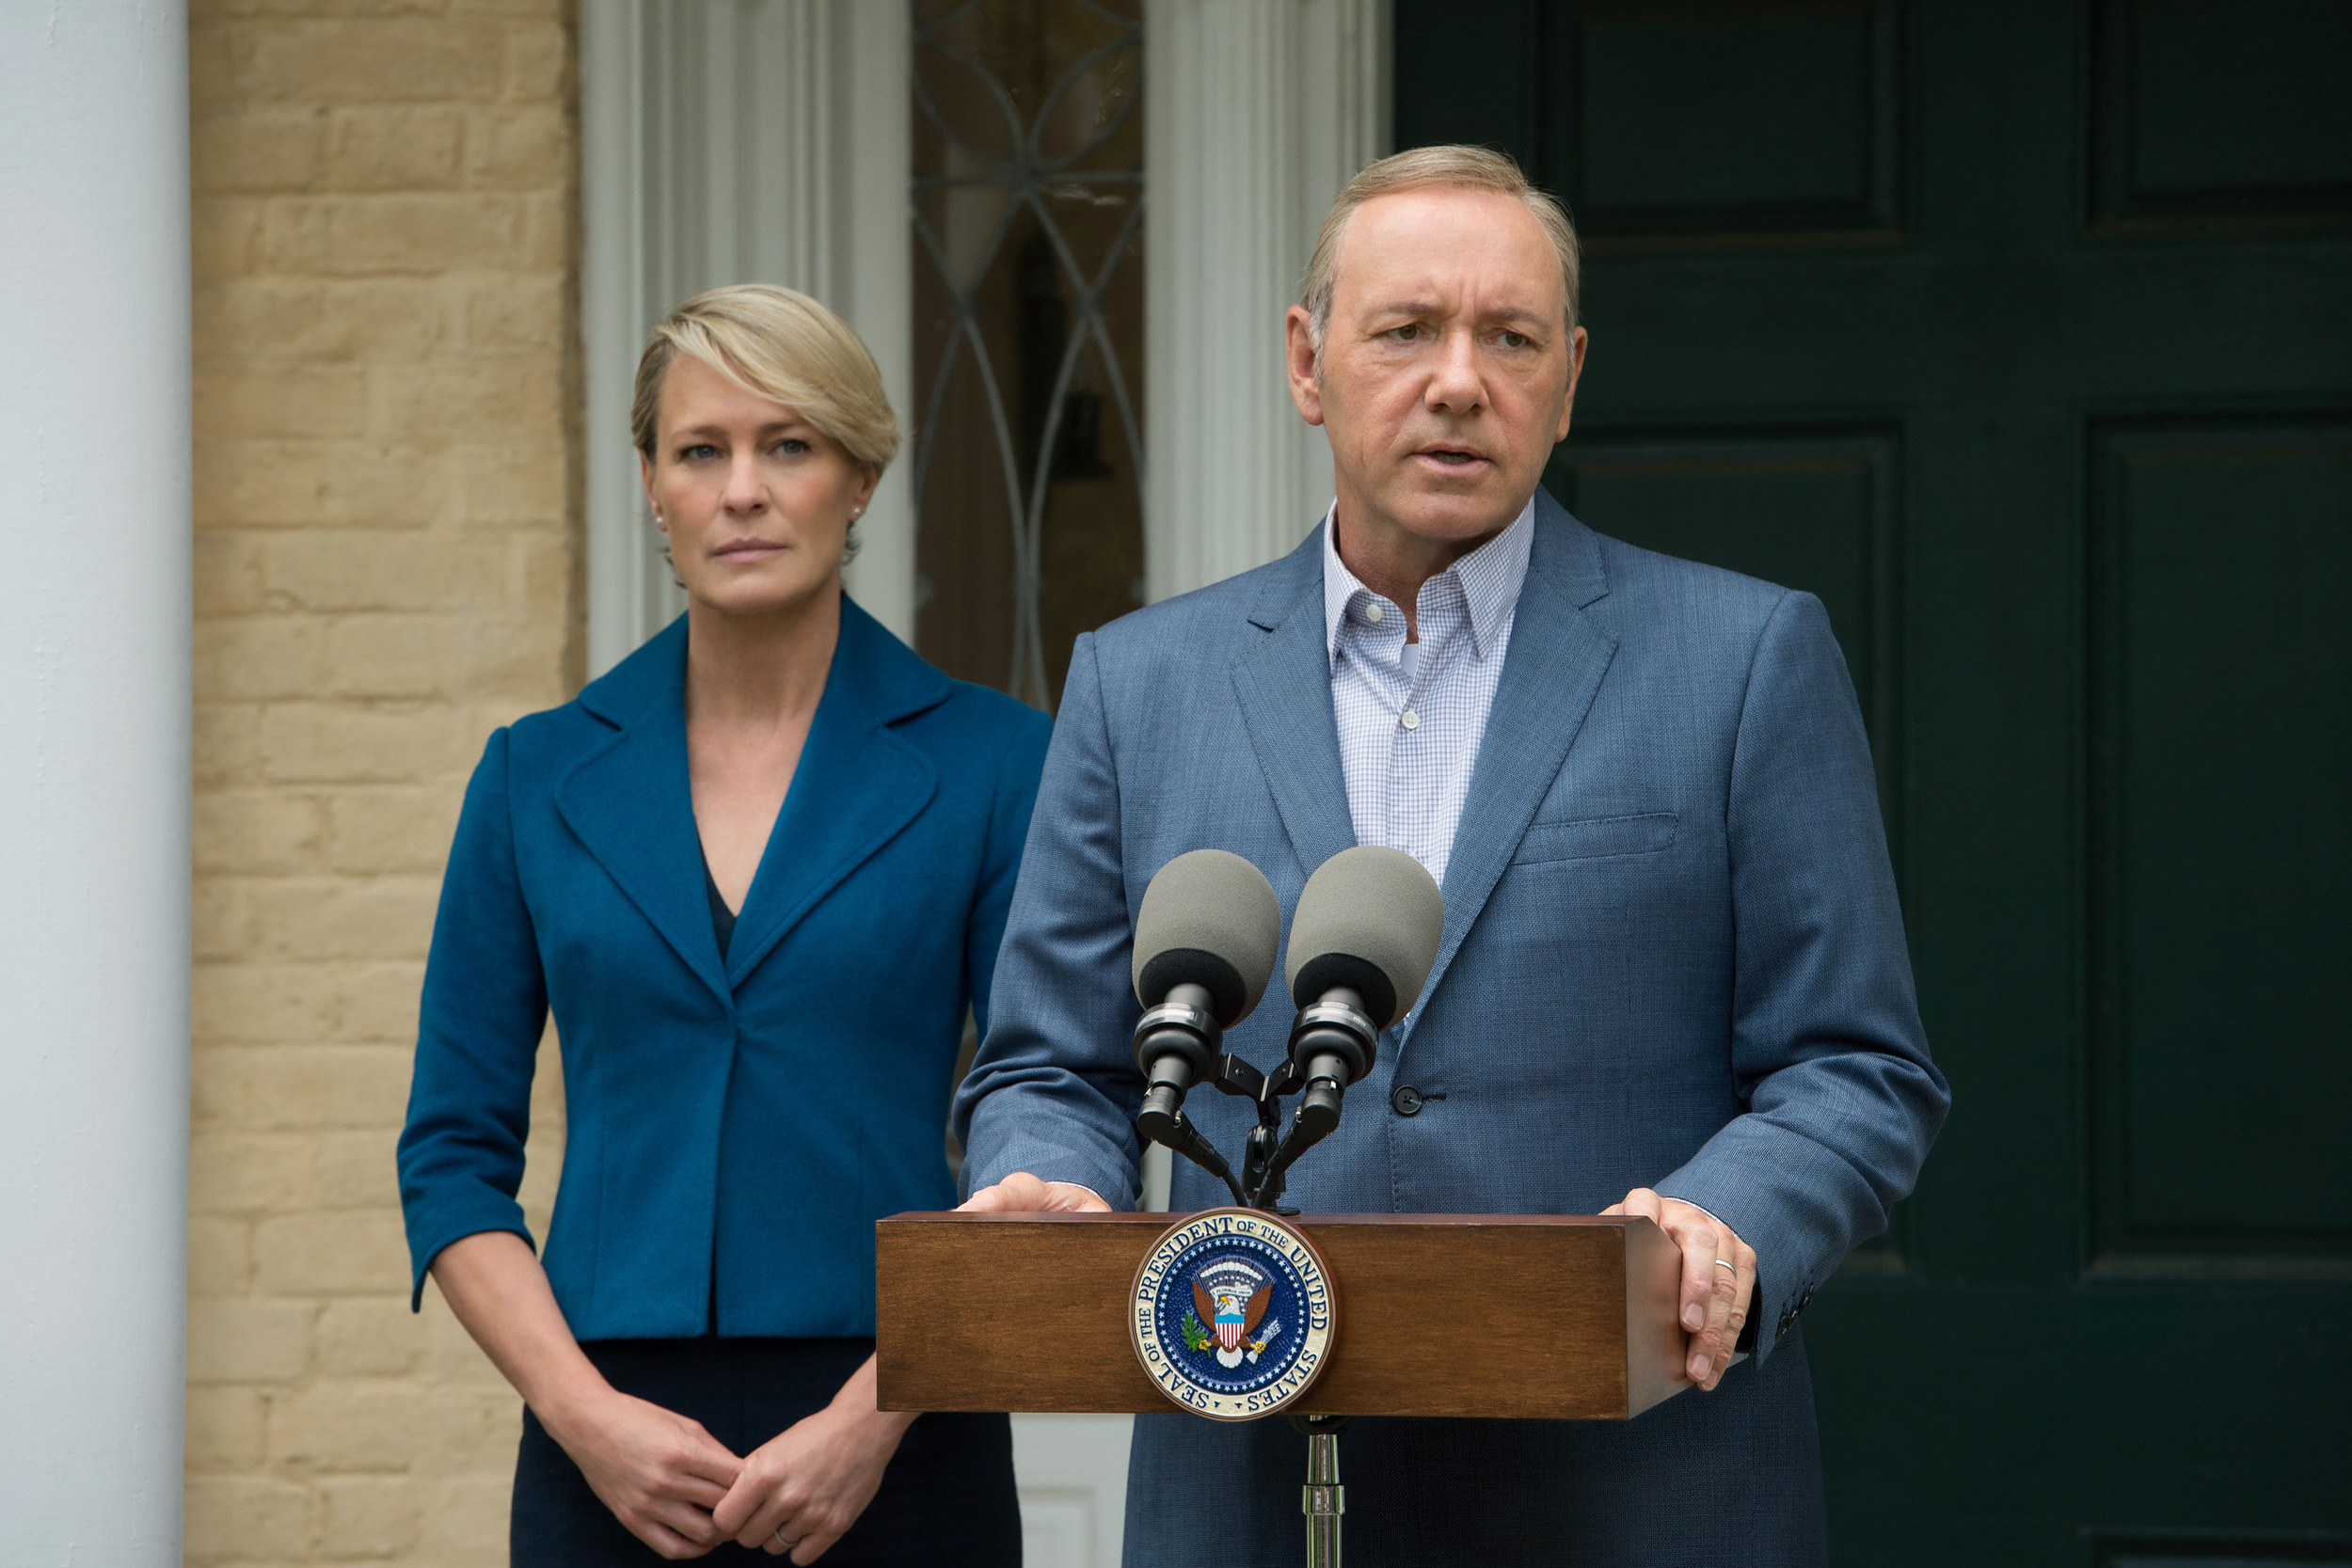 <p>From the beginning, <span><em>House of Cards</em> </span>was a show that delighted in pushing the envelope in terms of narrative believability. For a time, it was a lot of fun to see what new scheme Kevin Spacey’s Kevin Underwood would manage to cook up as he sought out ever more power for himself. Even in a show that relished the outlandish, however, the moment when Frank Underwood becomes president is, in its own way, a jumping-the-shark moment. After that, everything becomes just another piece of theater because, having attained what he so long sought, there’s nowhere else interesting for Frank to go. The rest of the series, including Underwood’s death, felt deeply contrived.</p><p><a href='https://www.msn.com/en-us/community/channel/vid-cj9pqbr0vn9in2b6ddcd8sfgpfq6x6utp44fssrv6mc2gtybw0us'>Follow us on MSN to see more of our exclusive entertainment content.</a></p>